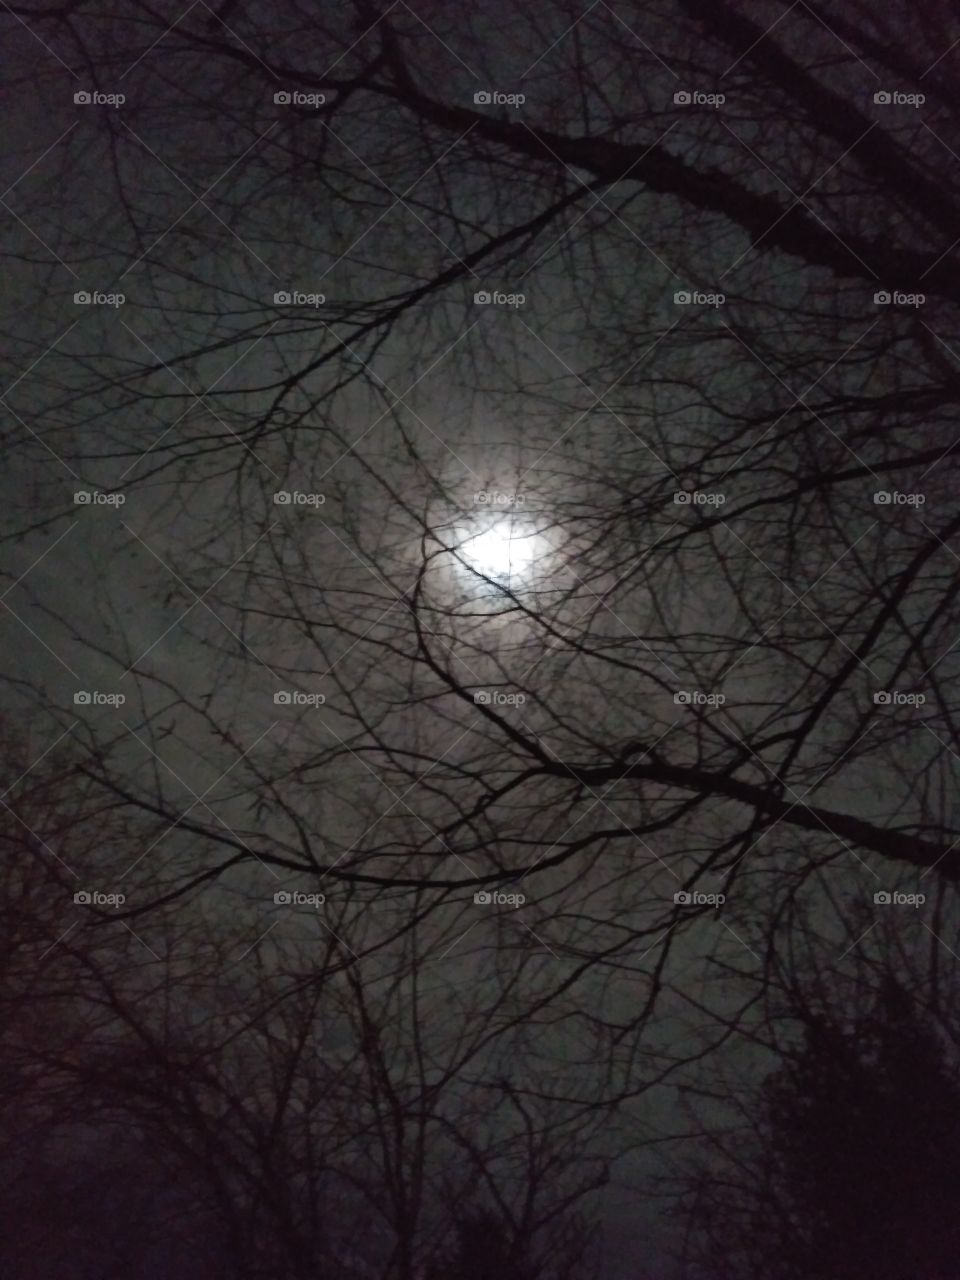 Full moonlight night with ominous tree branches obscuring my wintery view